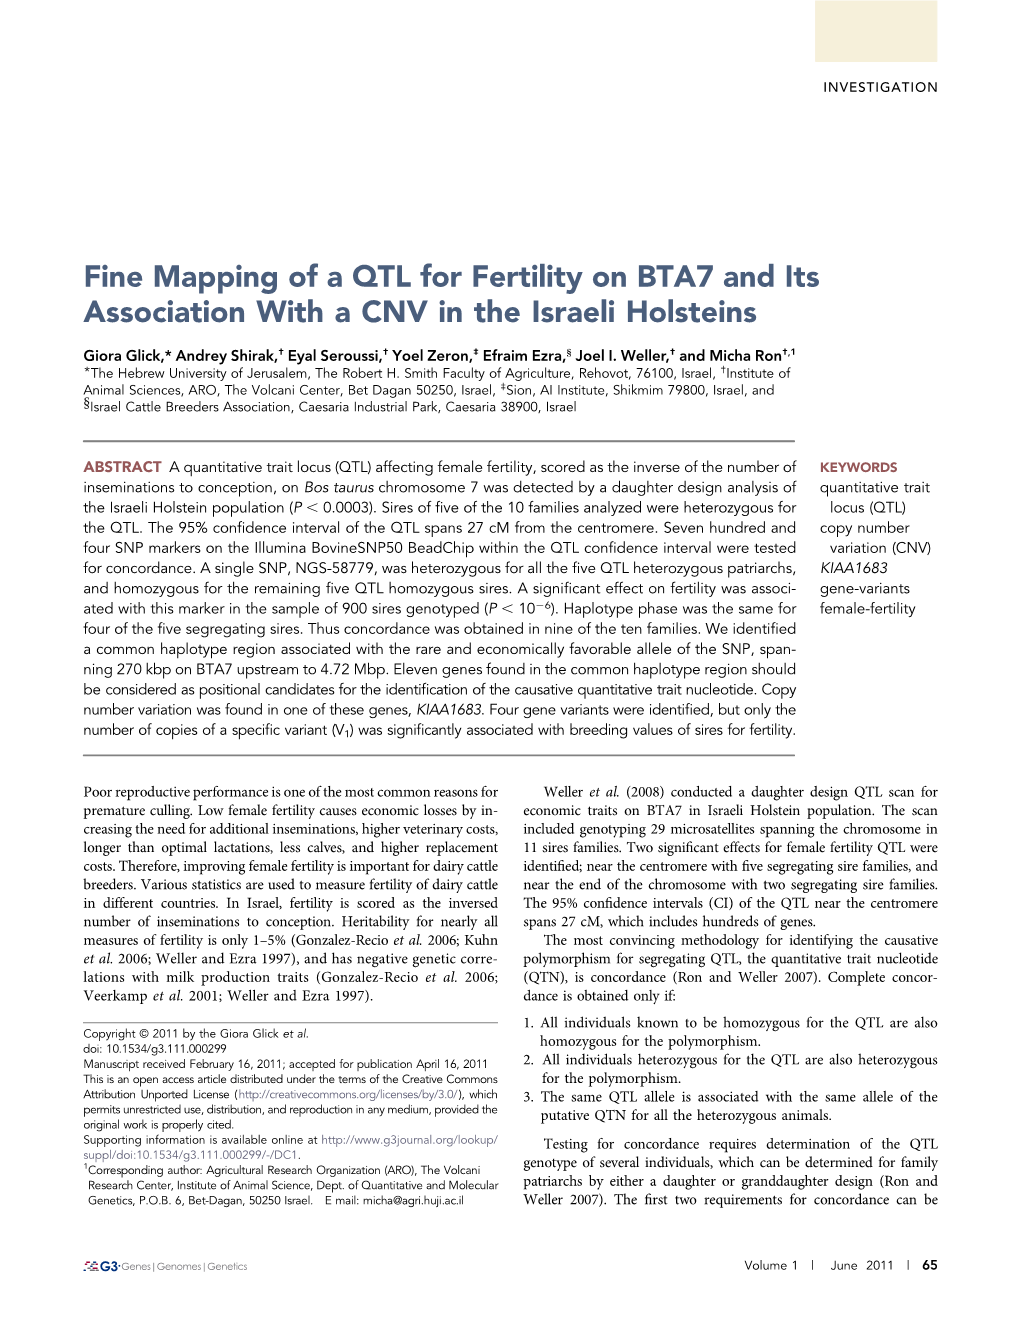 Fine Mapping of a QTL for Fertility on BTA7 and Its Association with a CNV in the Israeli Holsteins